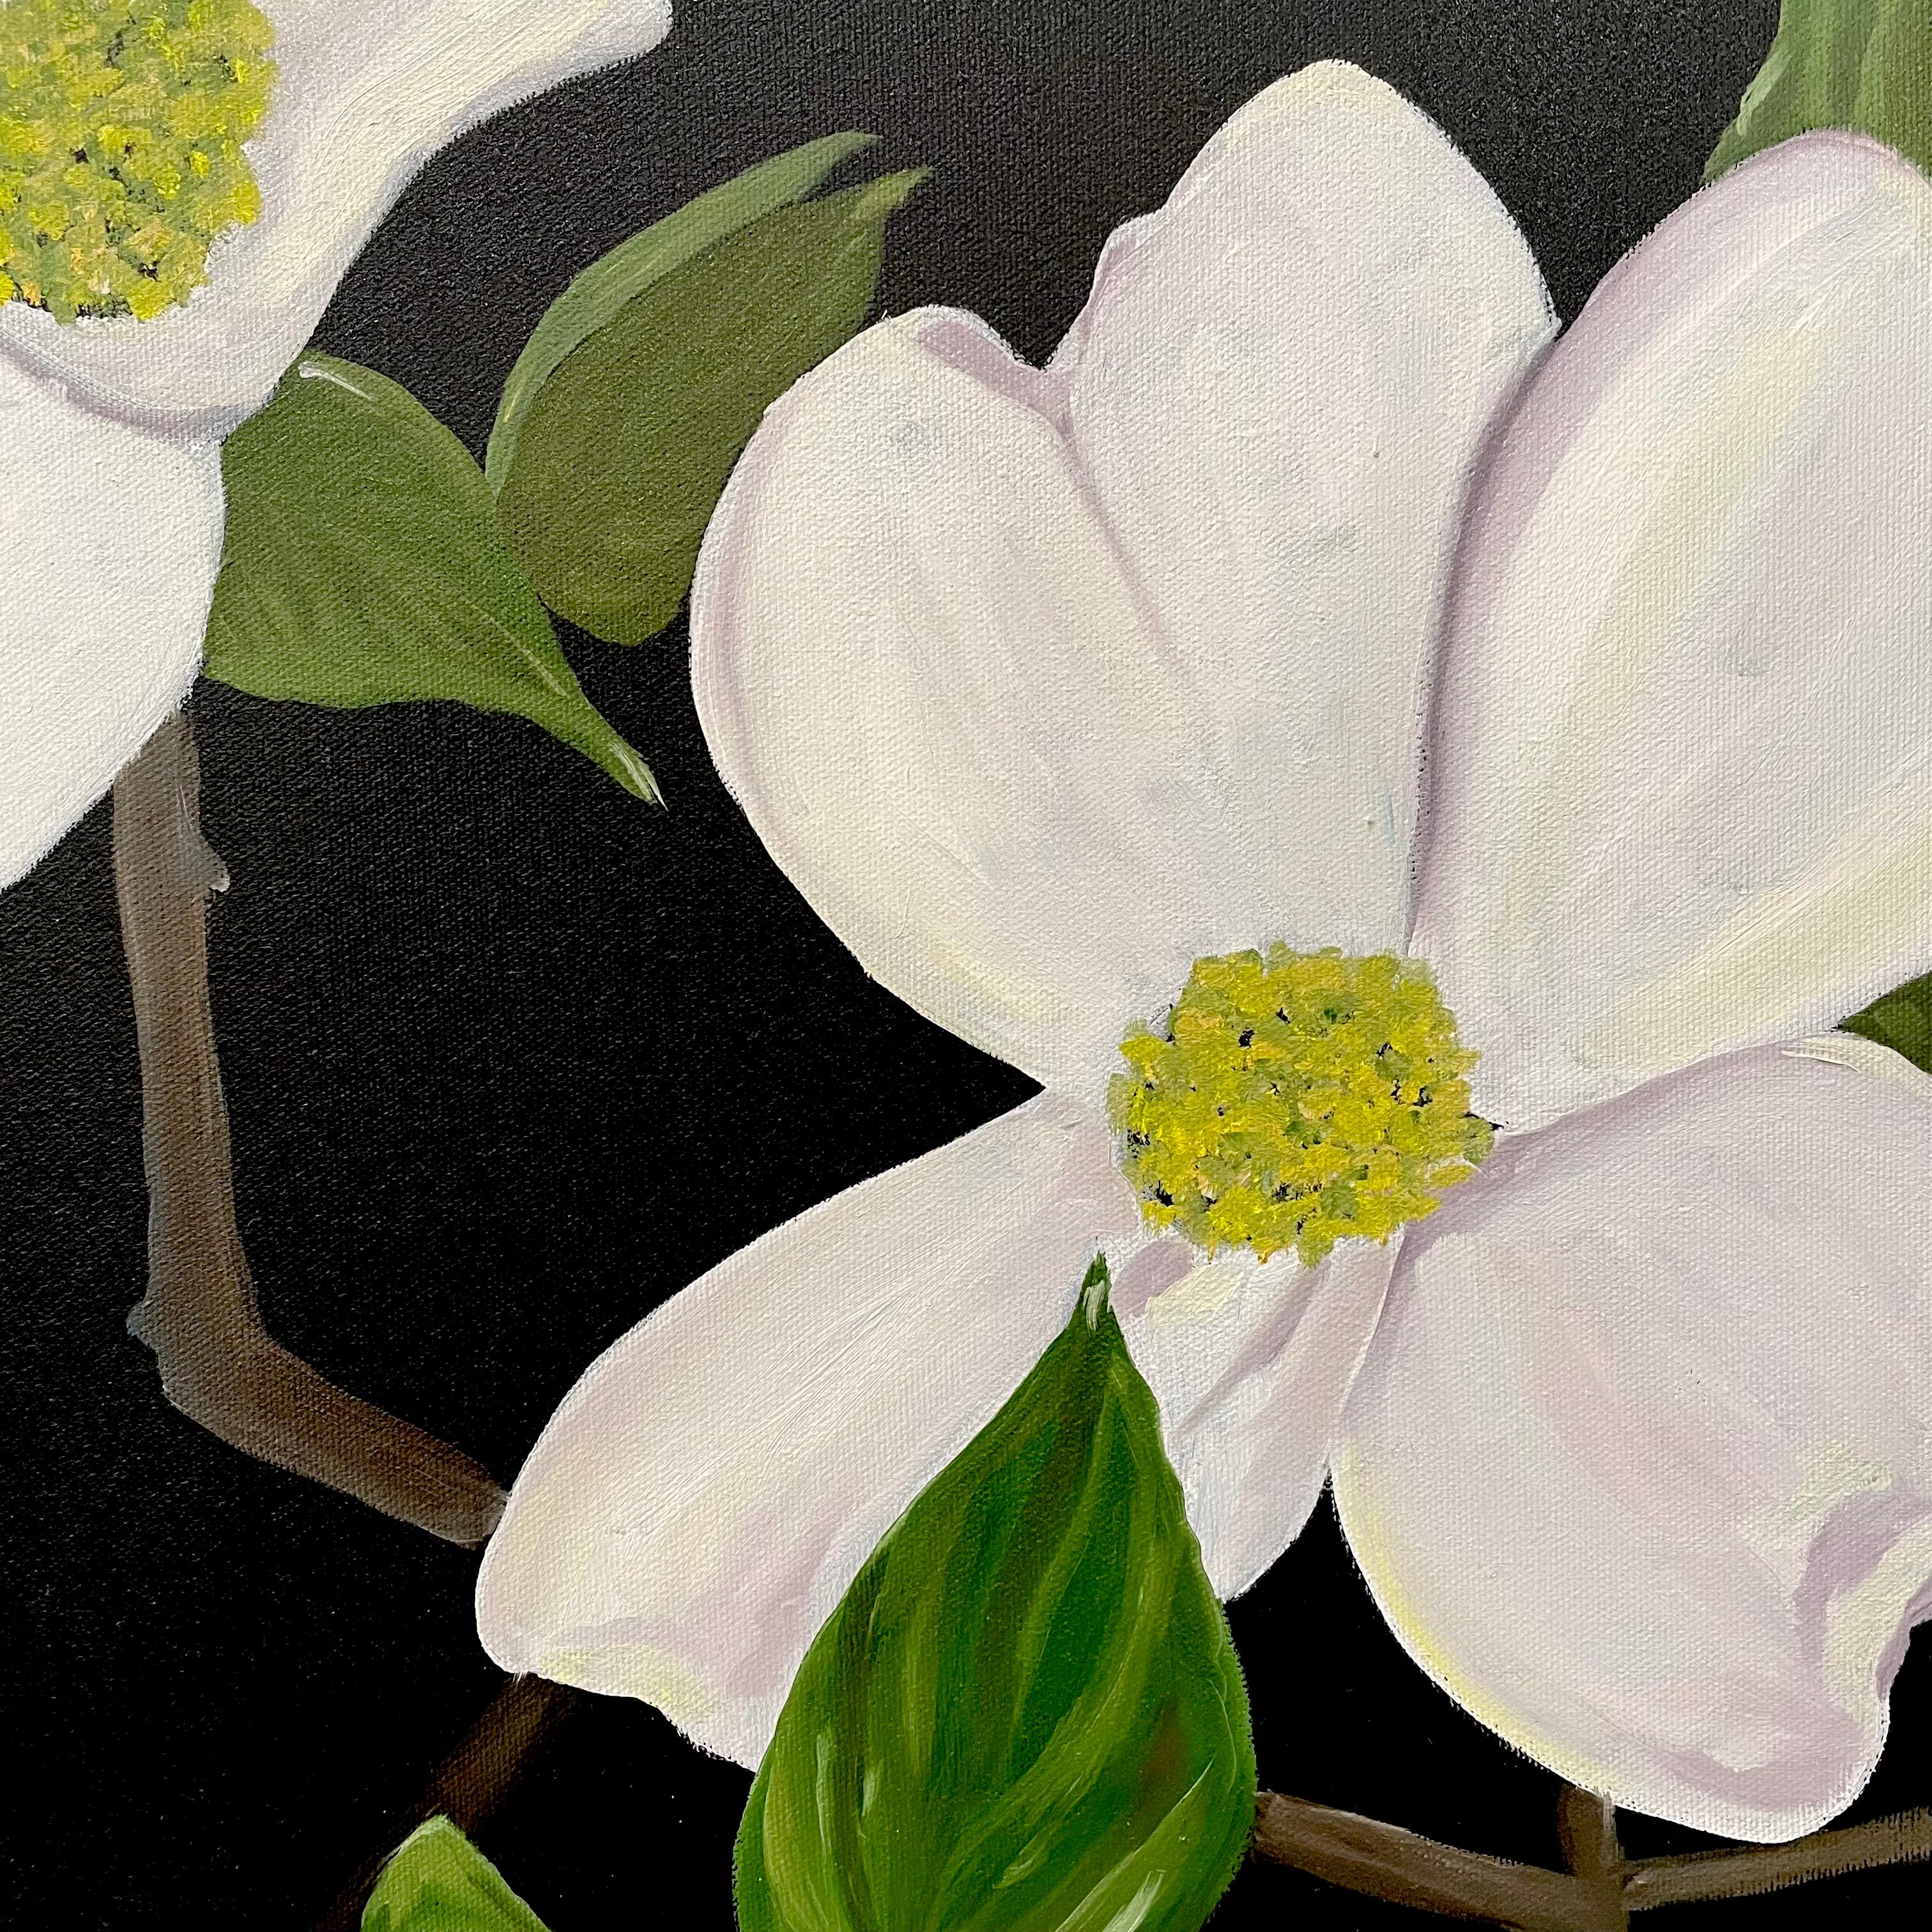 White Flowers and Green Leaves against a Black Background. Title - Wild Dogwood - Beige Still-Life Painting by Ken Miller